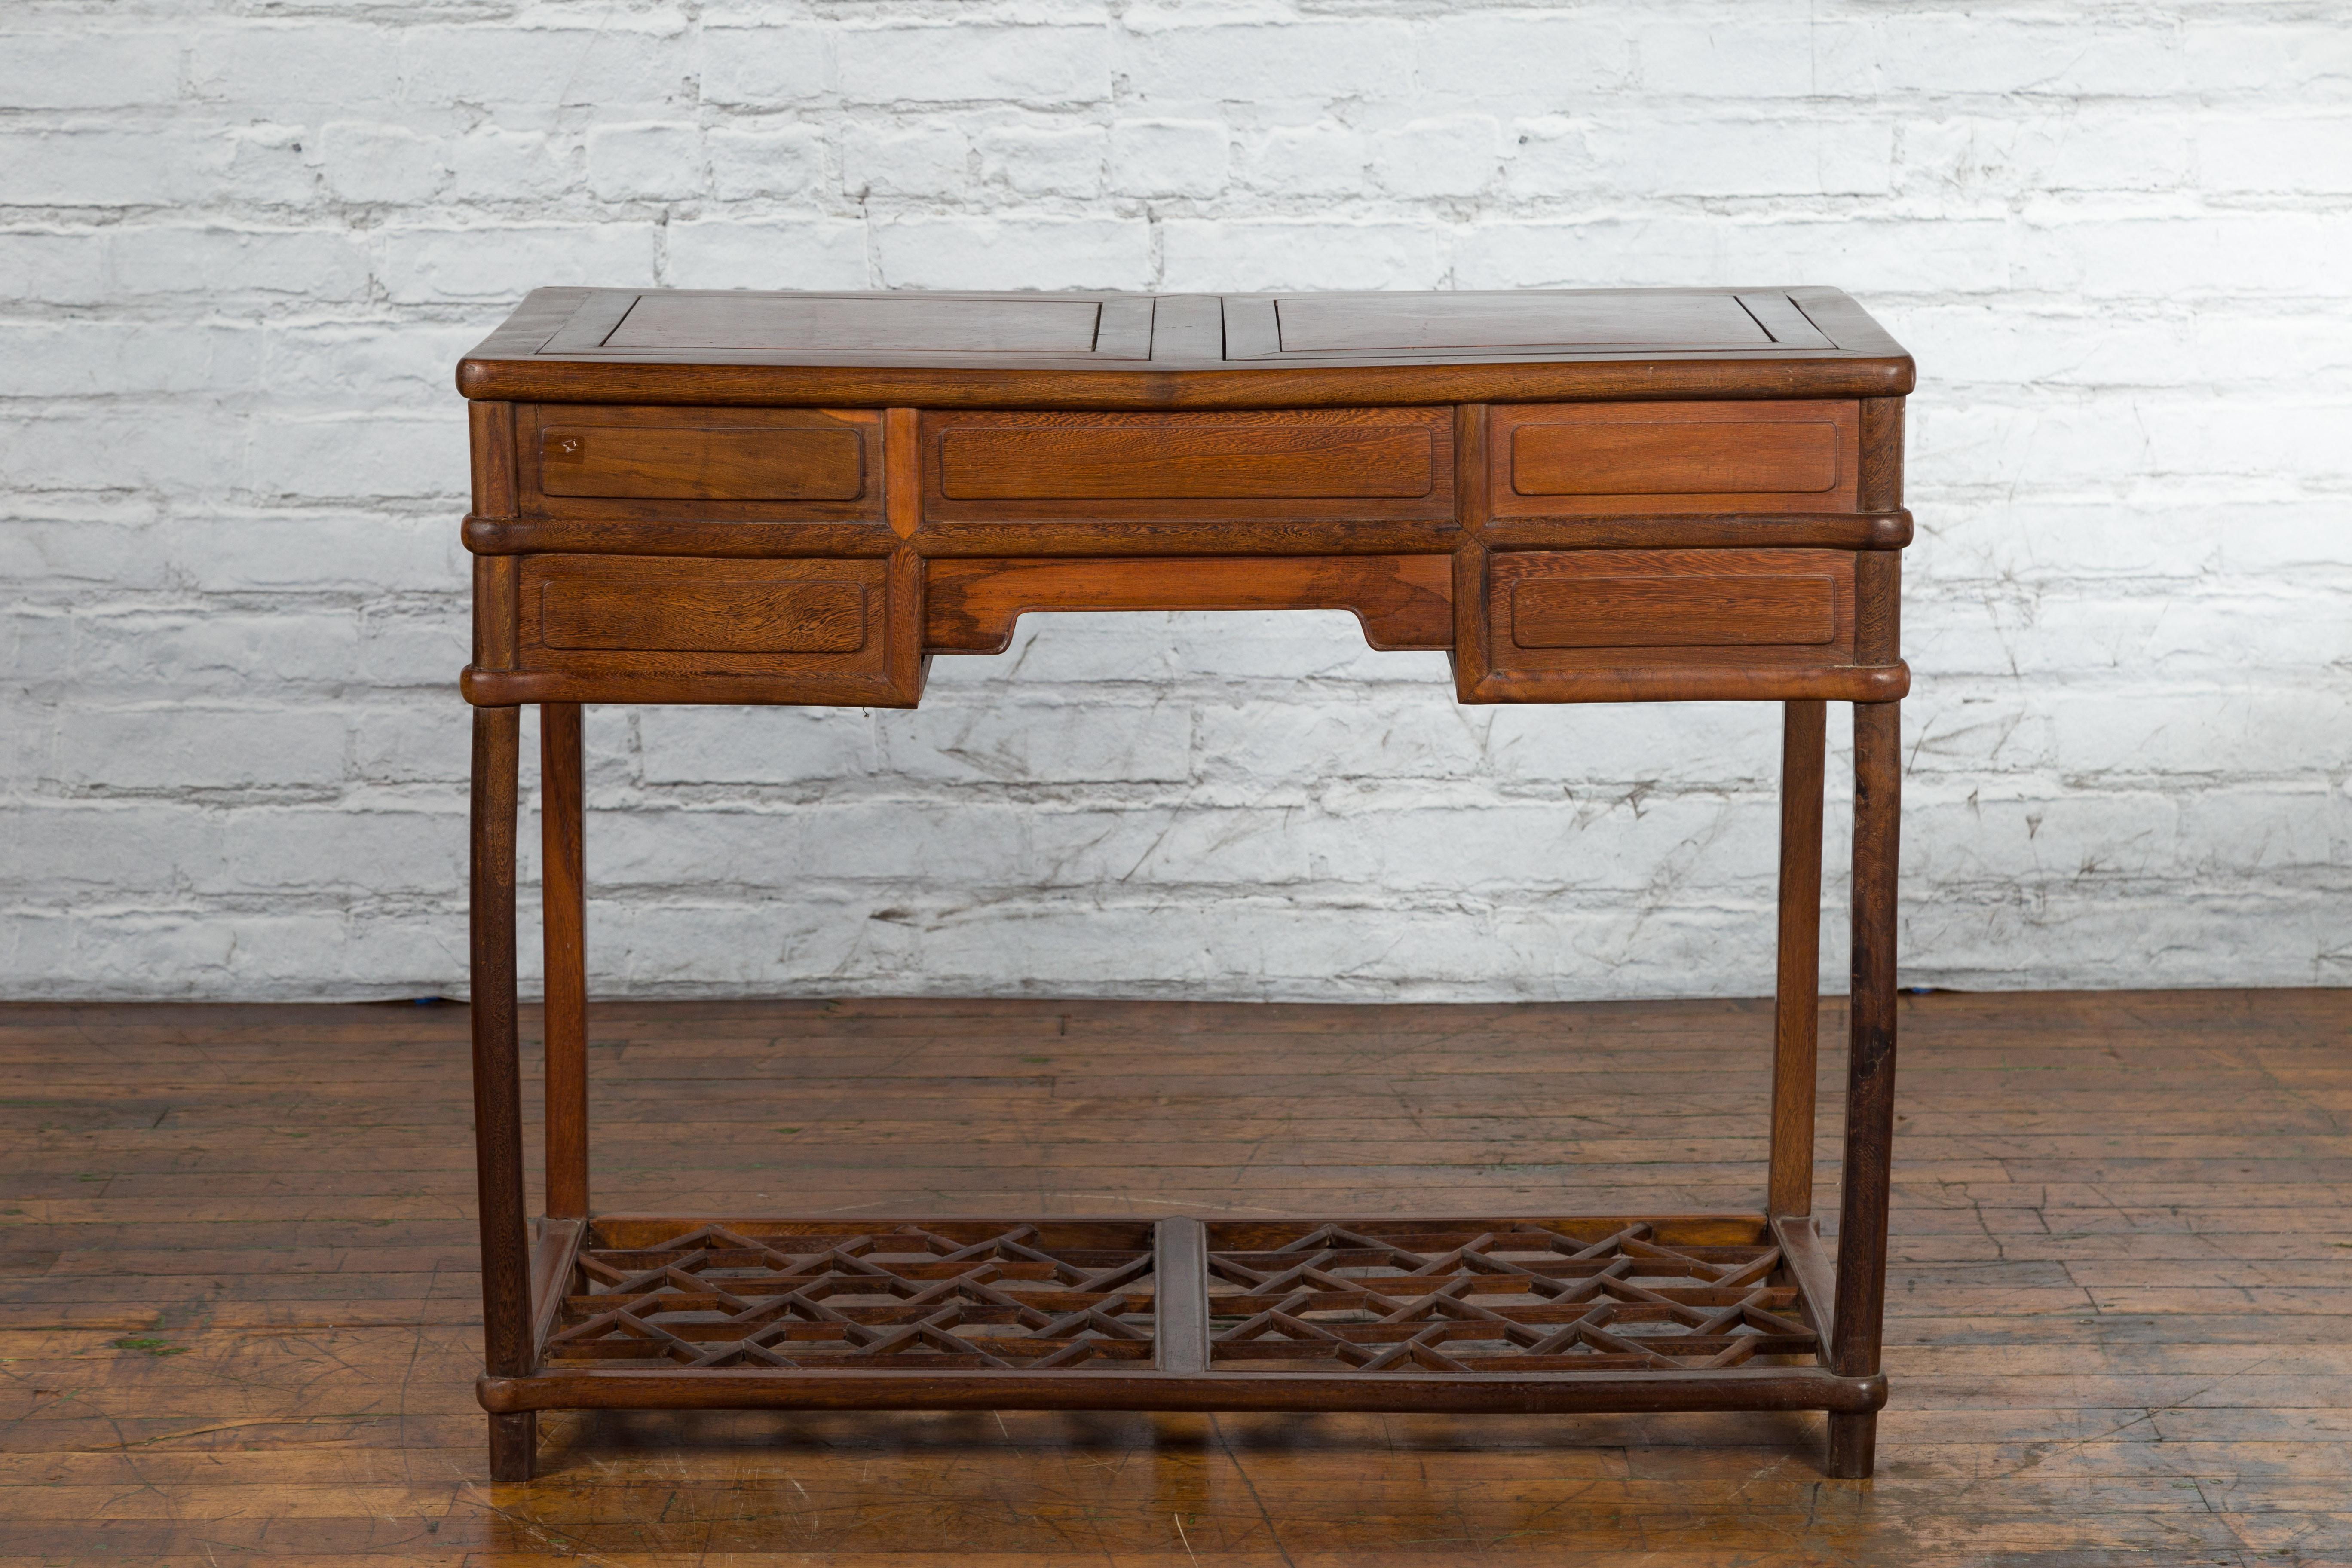 Qing Dynasty 19th Century Desk with Burlwood Top, Drawers and Cracked Ice Shelf For Sale 6